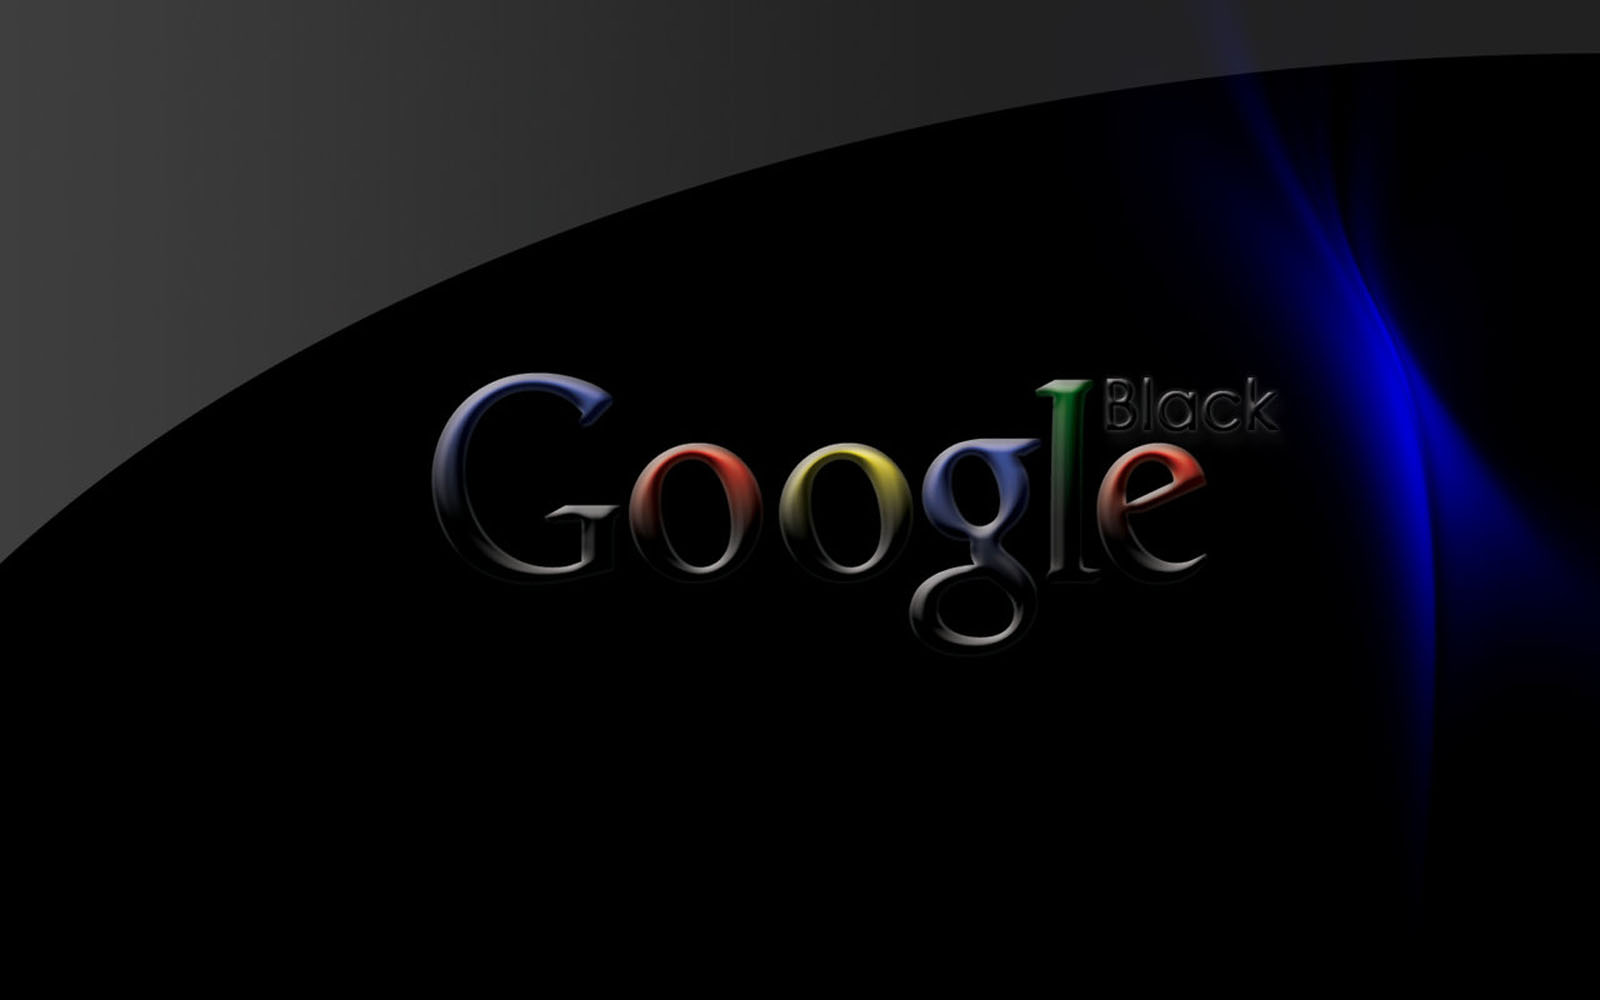 Tag Google Wallpaper Background Photos Image And Pictures For